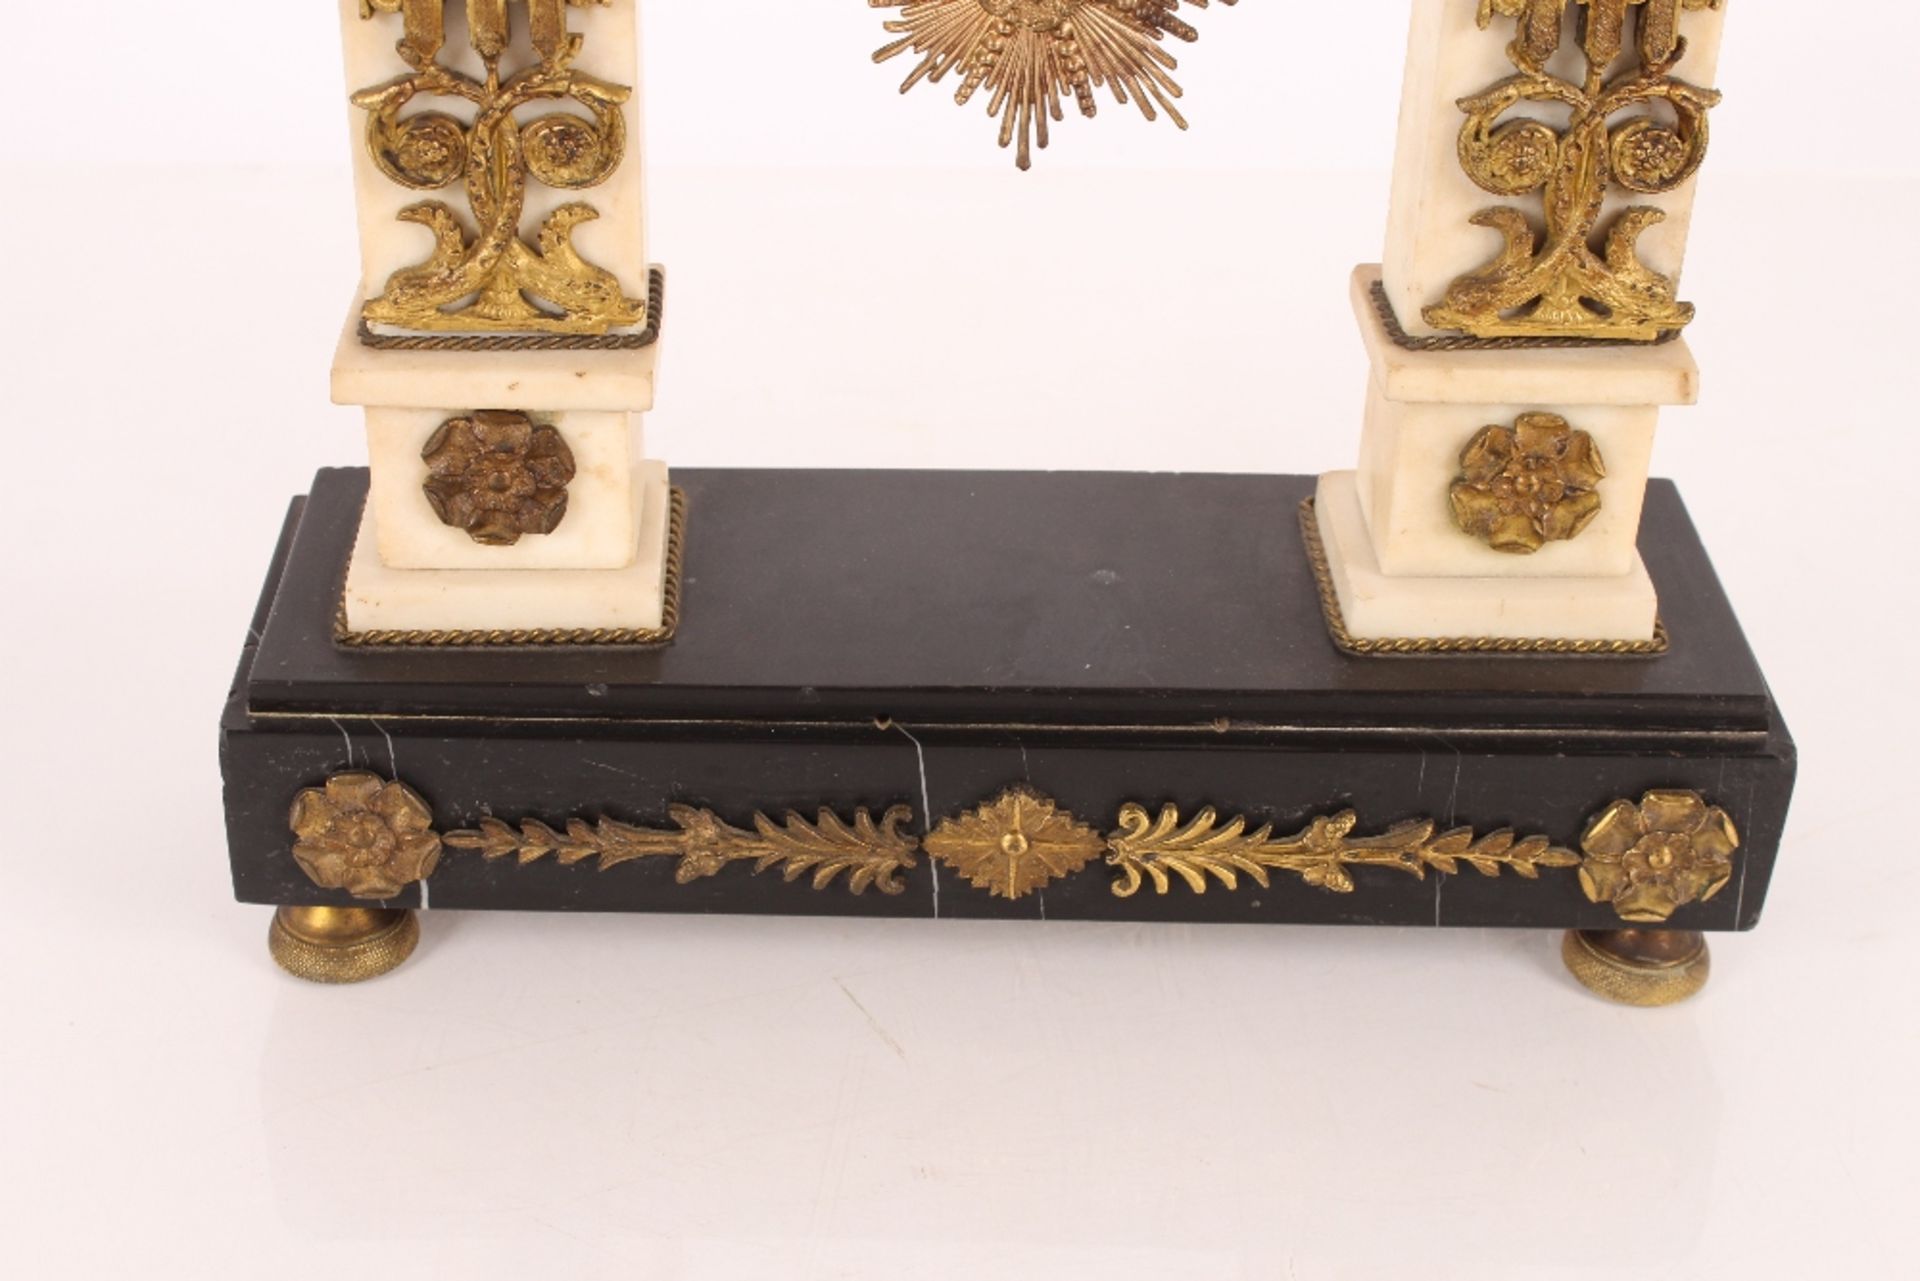 A 19th Century French marble and Ormolu mounted mantel clock surmounted by griffins and garlands - Image 4 of 6